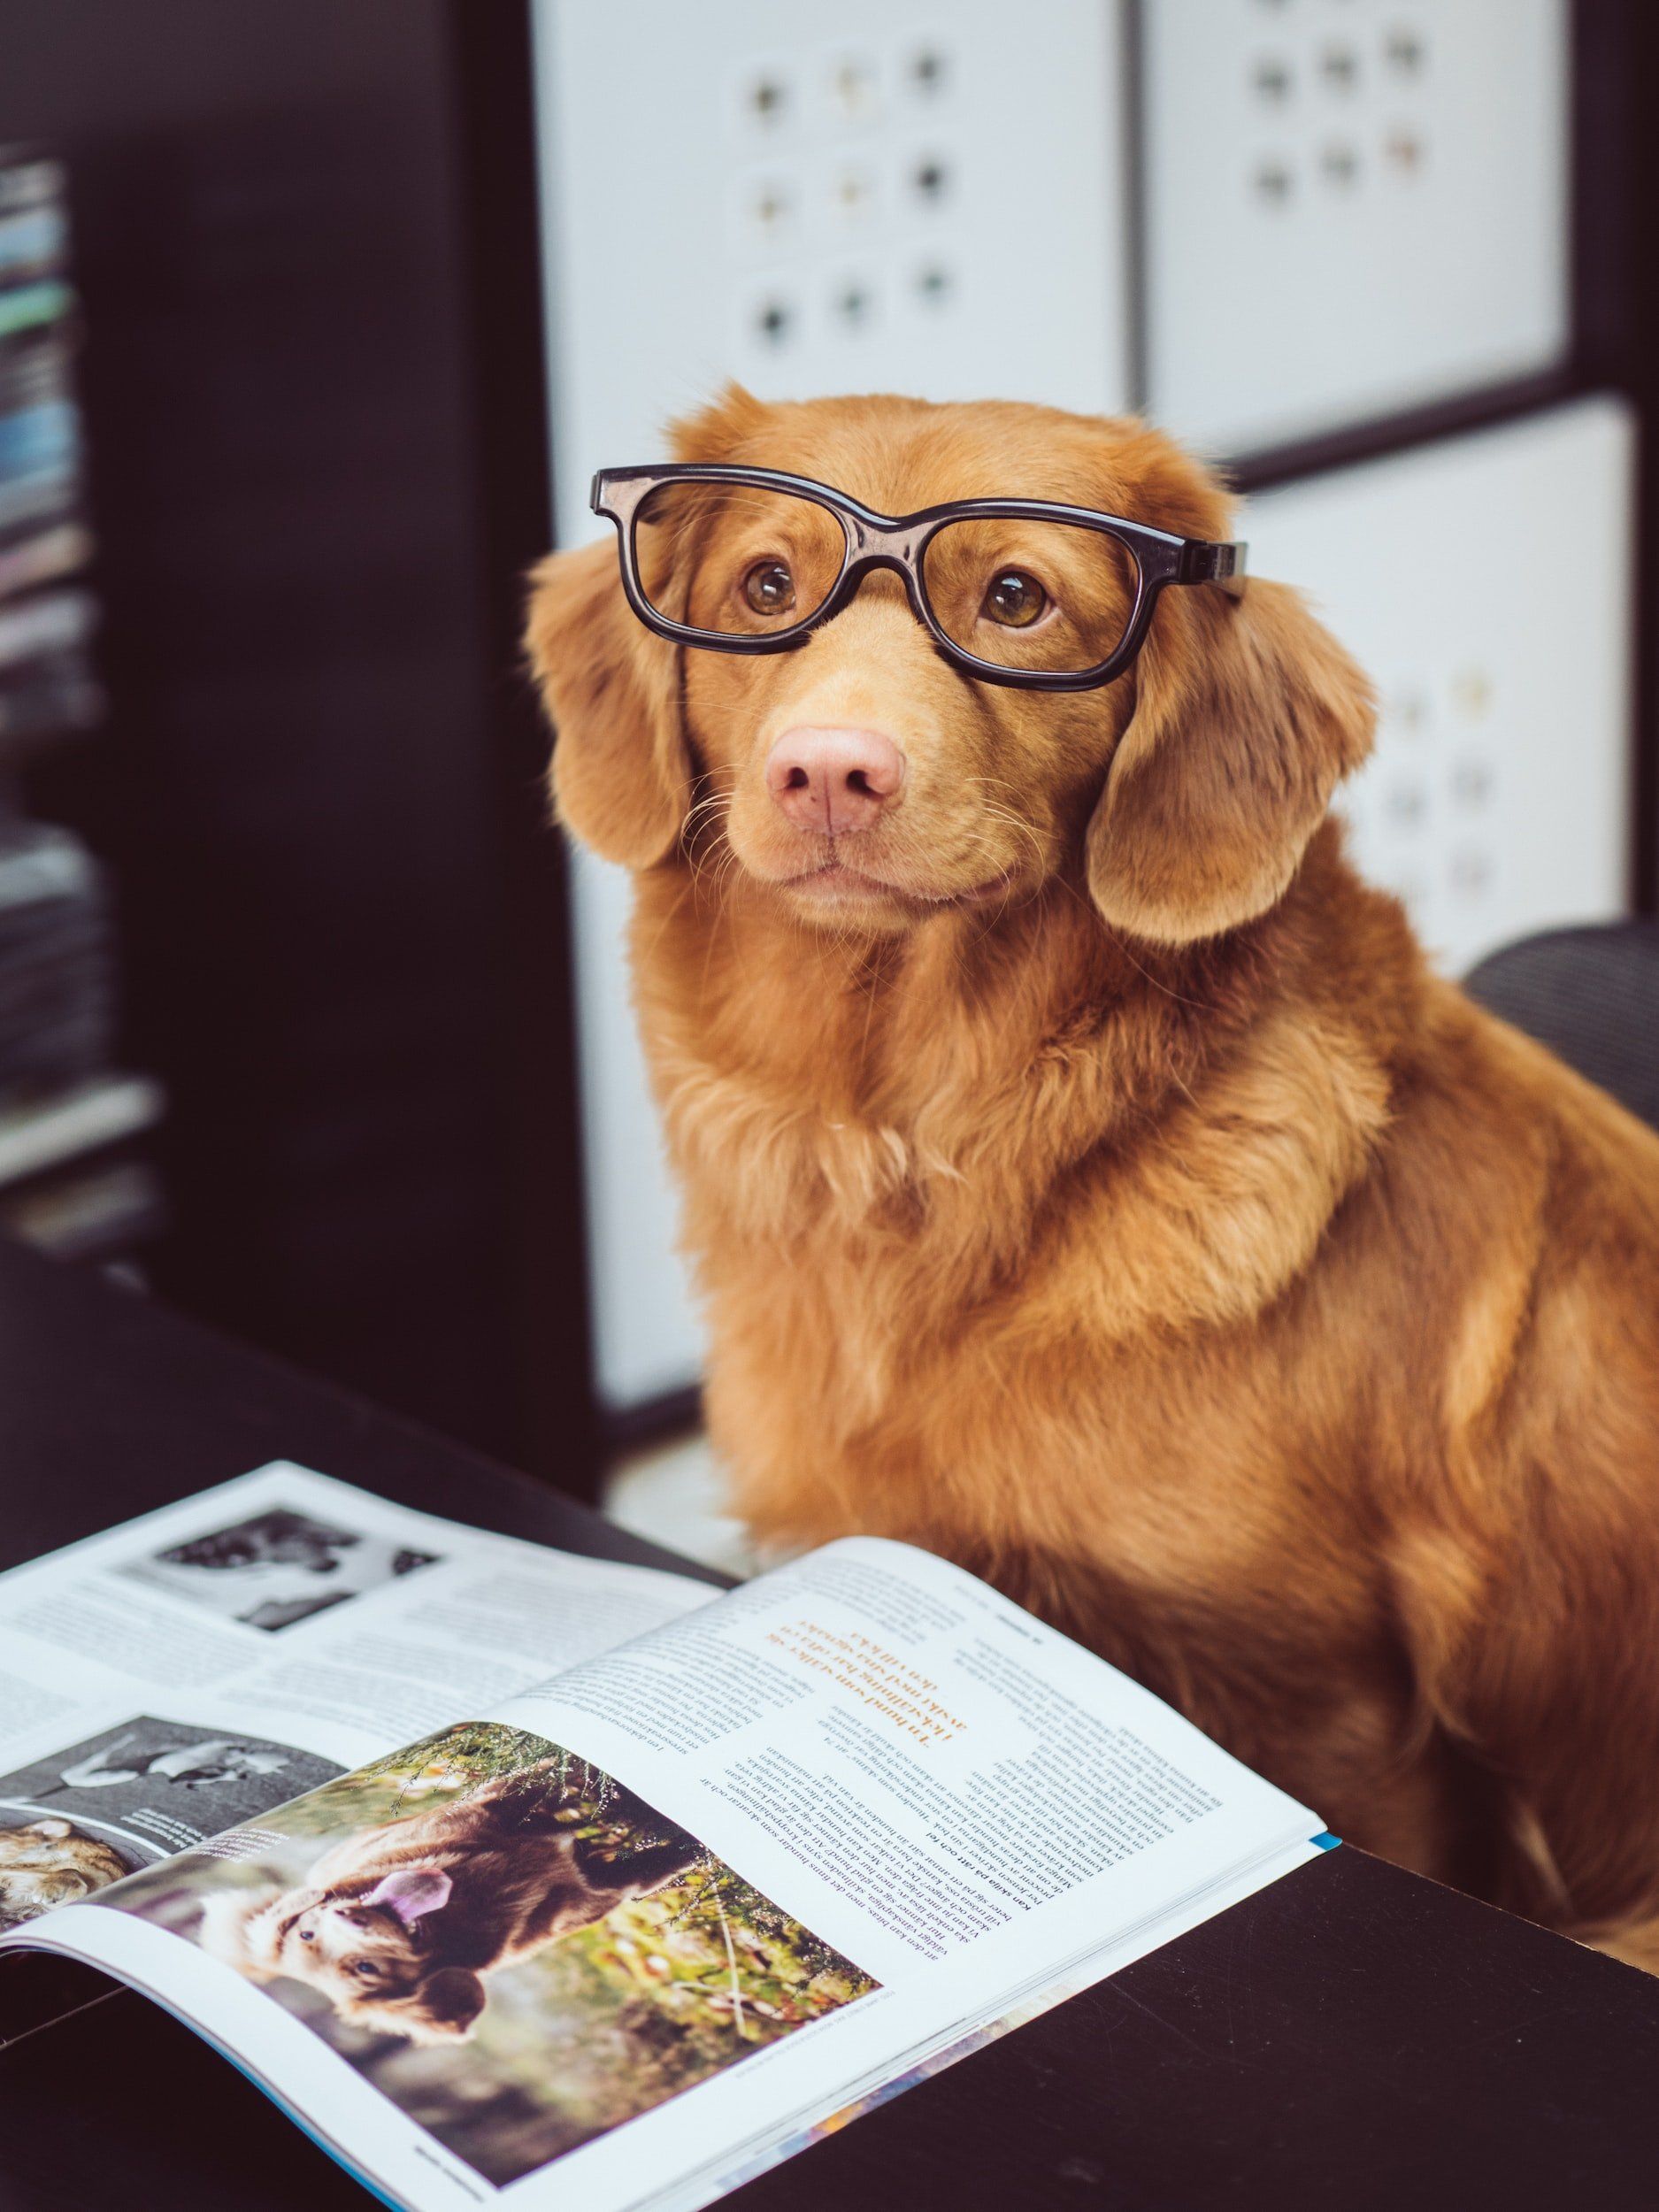 A dog wearing glasses is reading a book